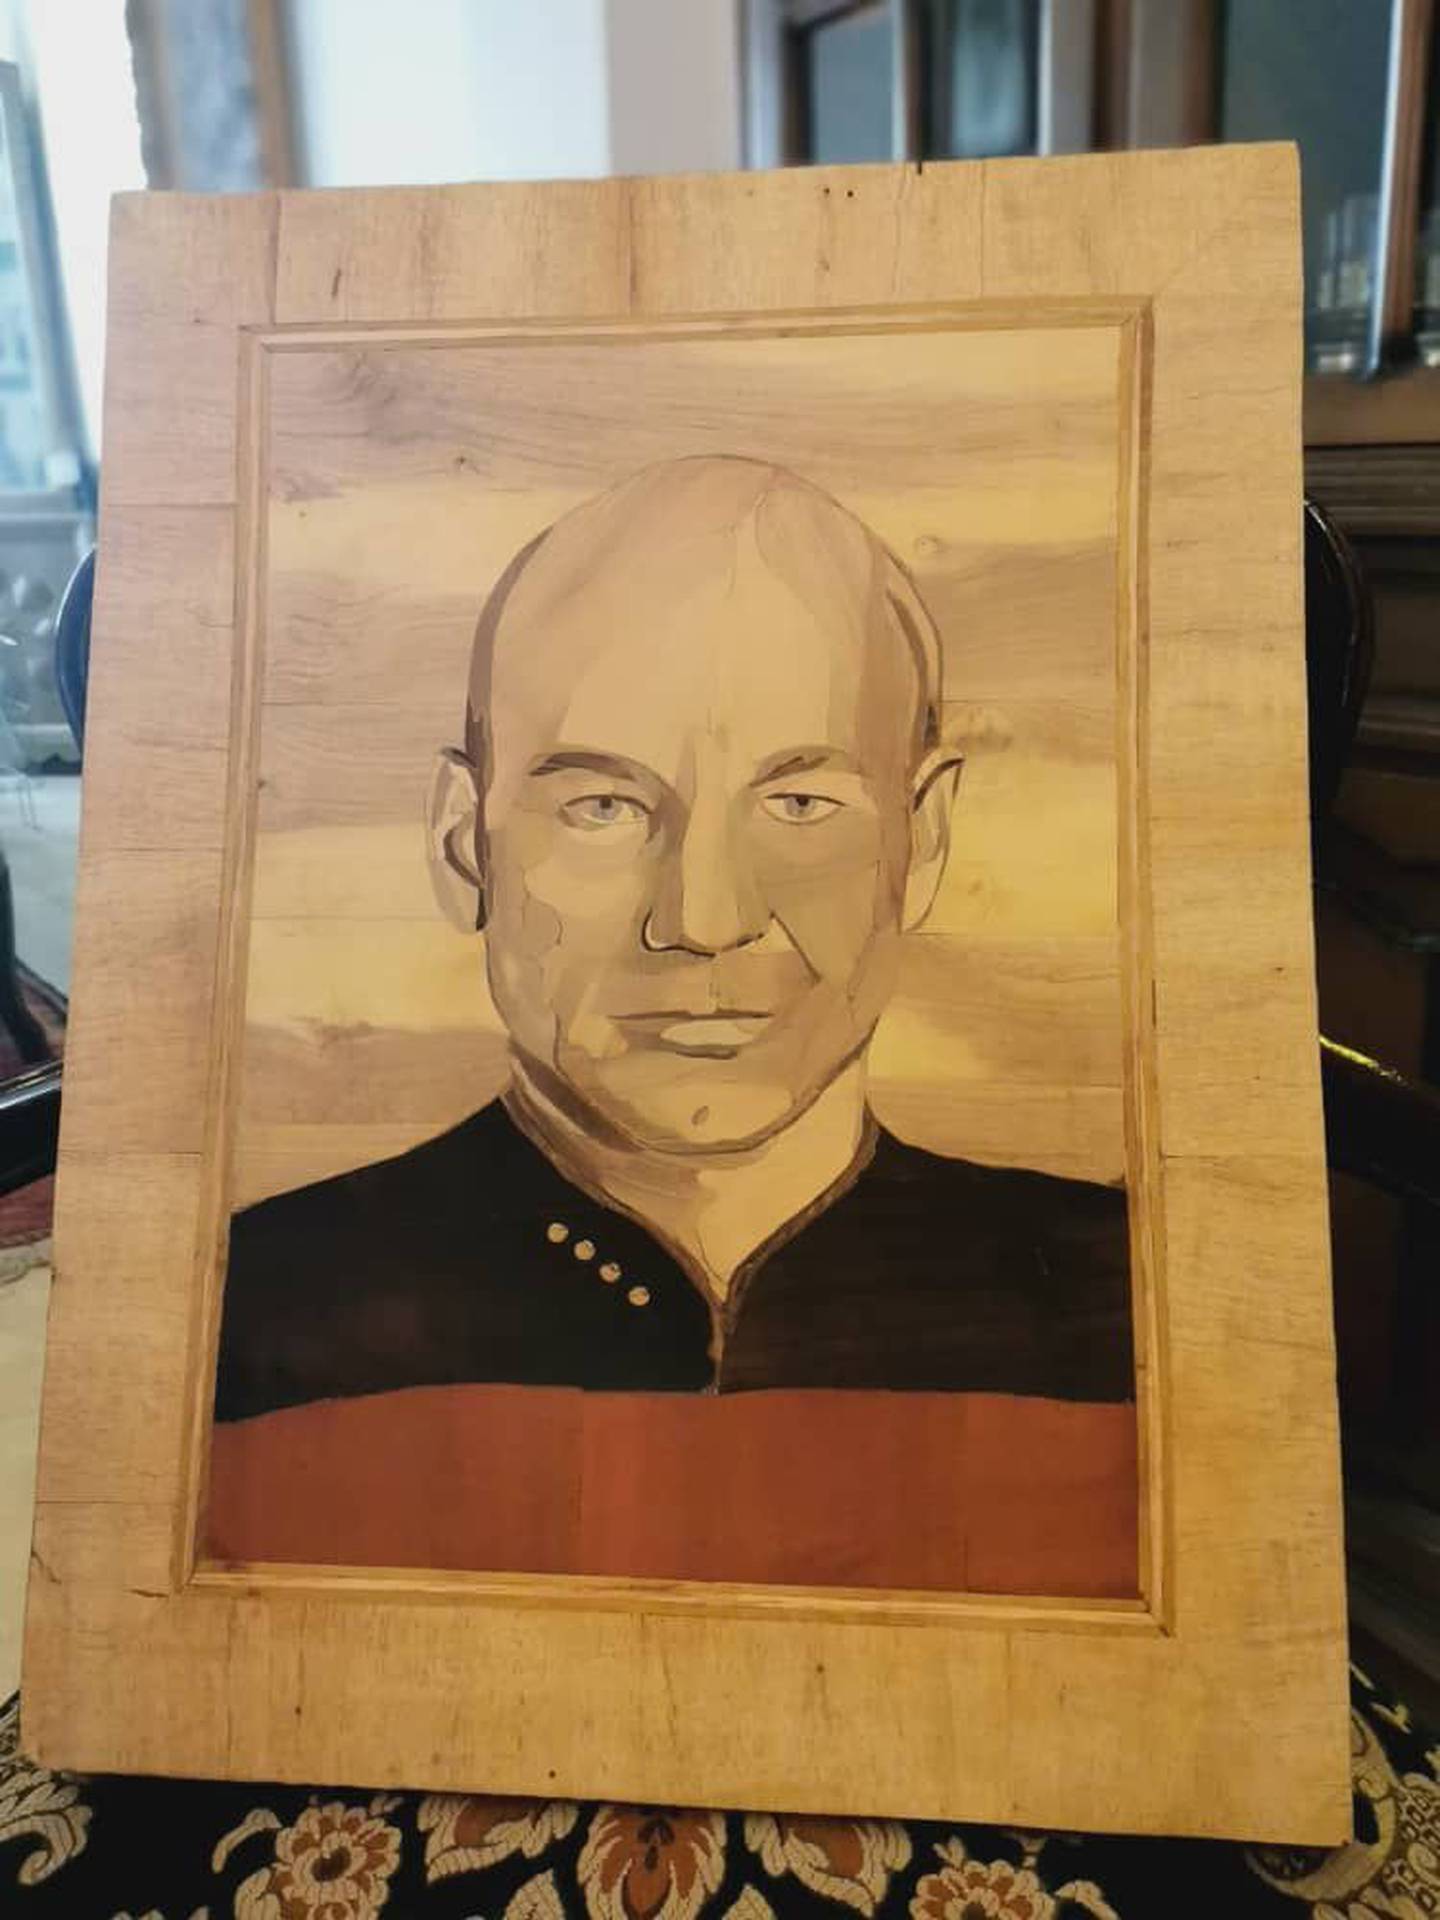 One of Anoosheh Ashoori's creations, Jean-Luc Picard of 'Star Trek', crafted in Evin prison. Photo: family handout